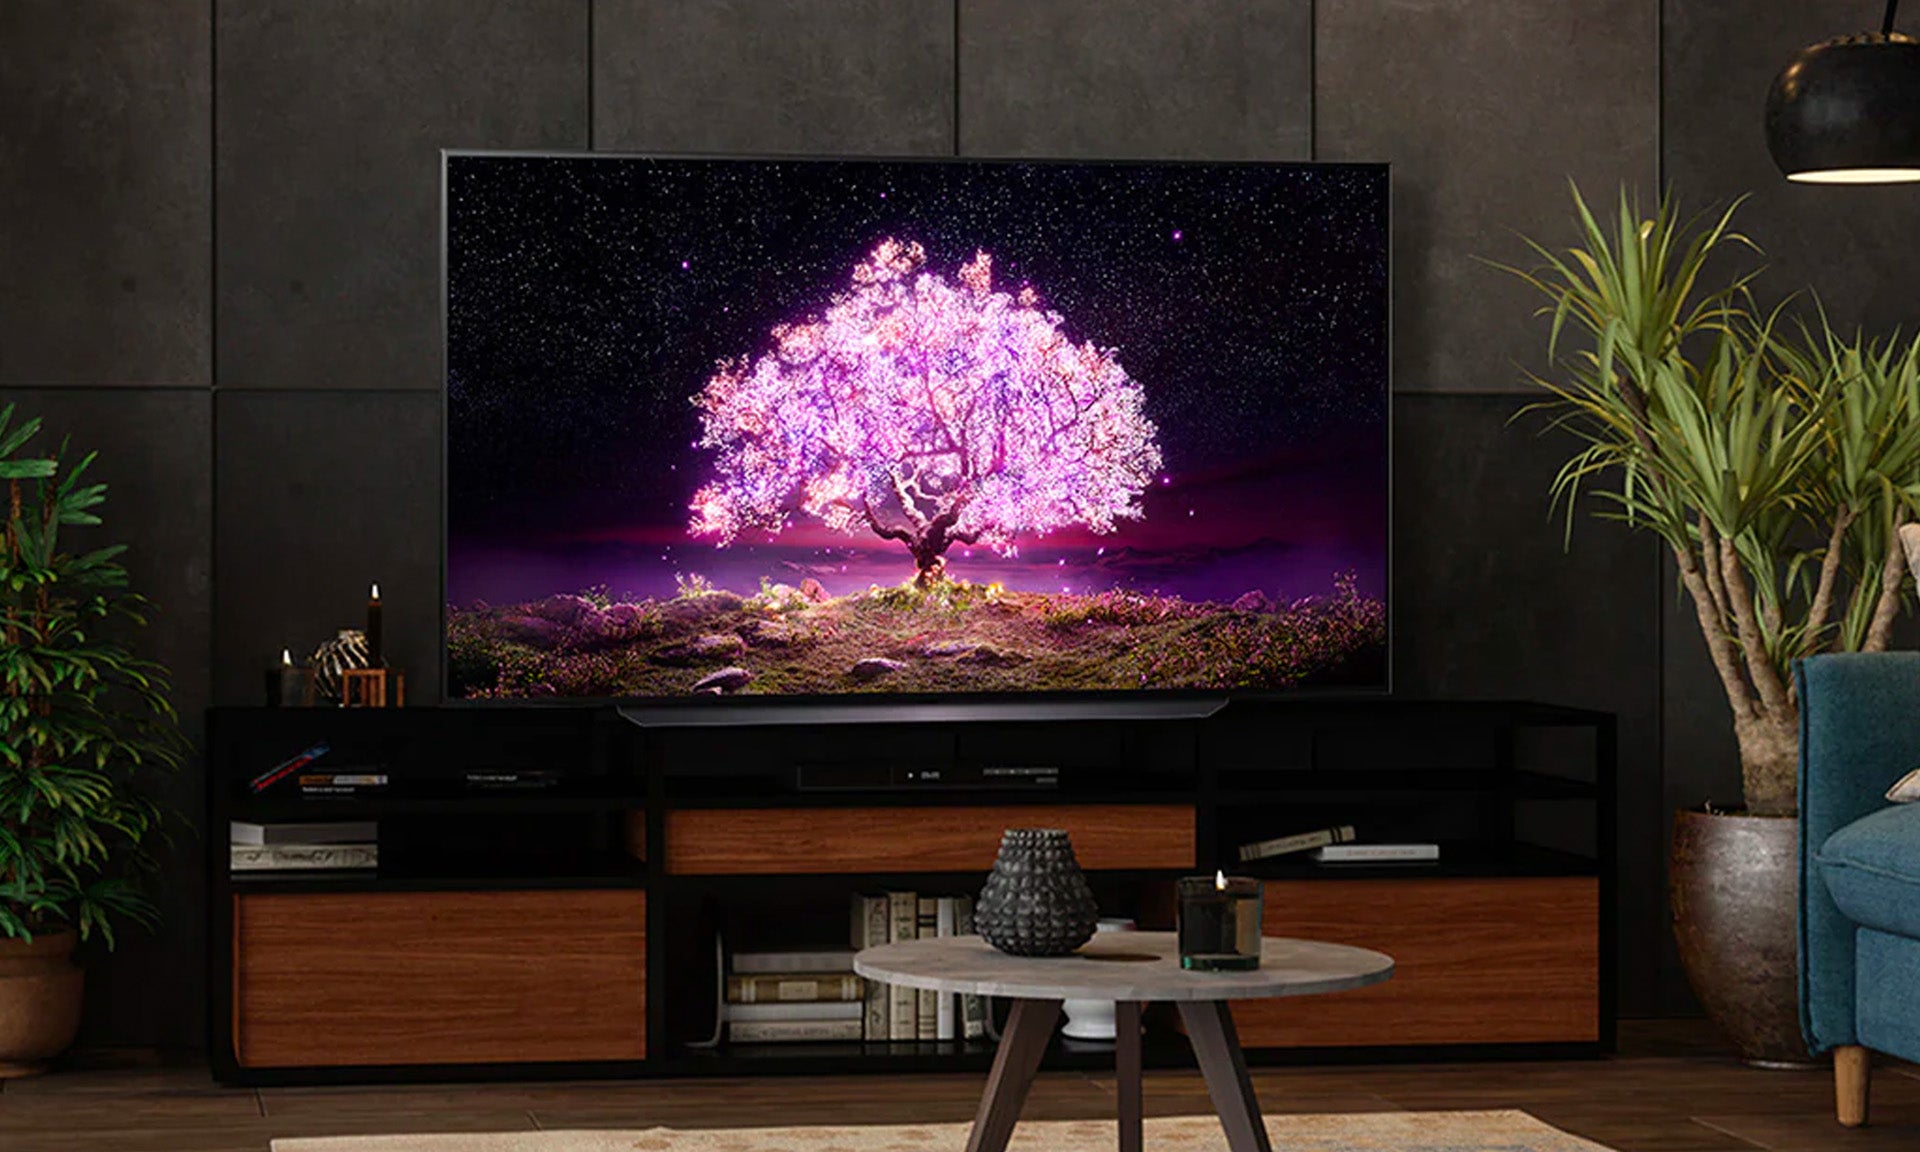 Image for Get the awesome LG C1 OLED TV for just £899 from Box this Black Friday